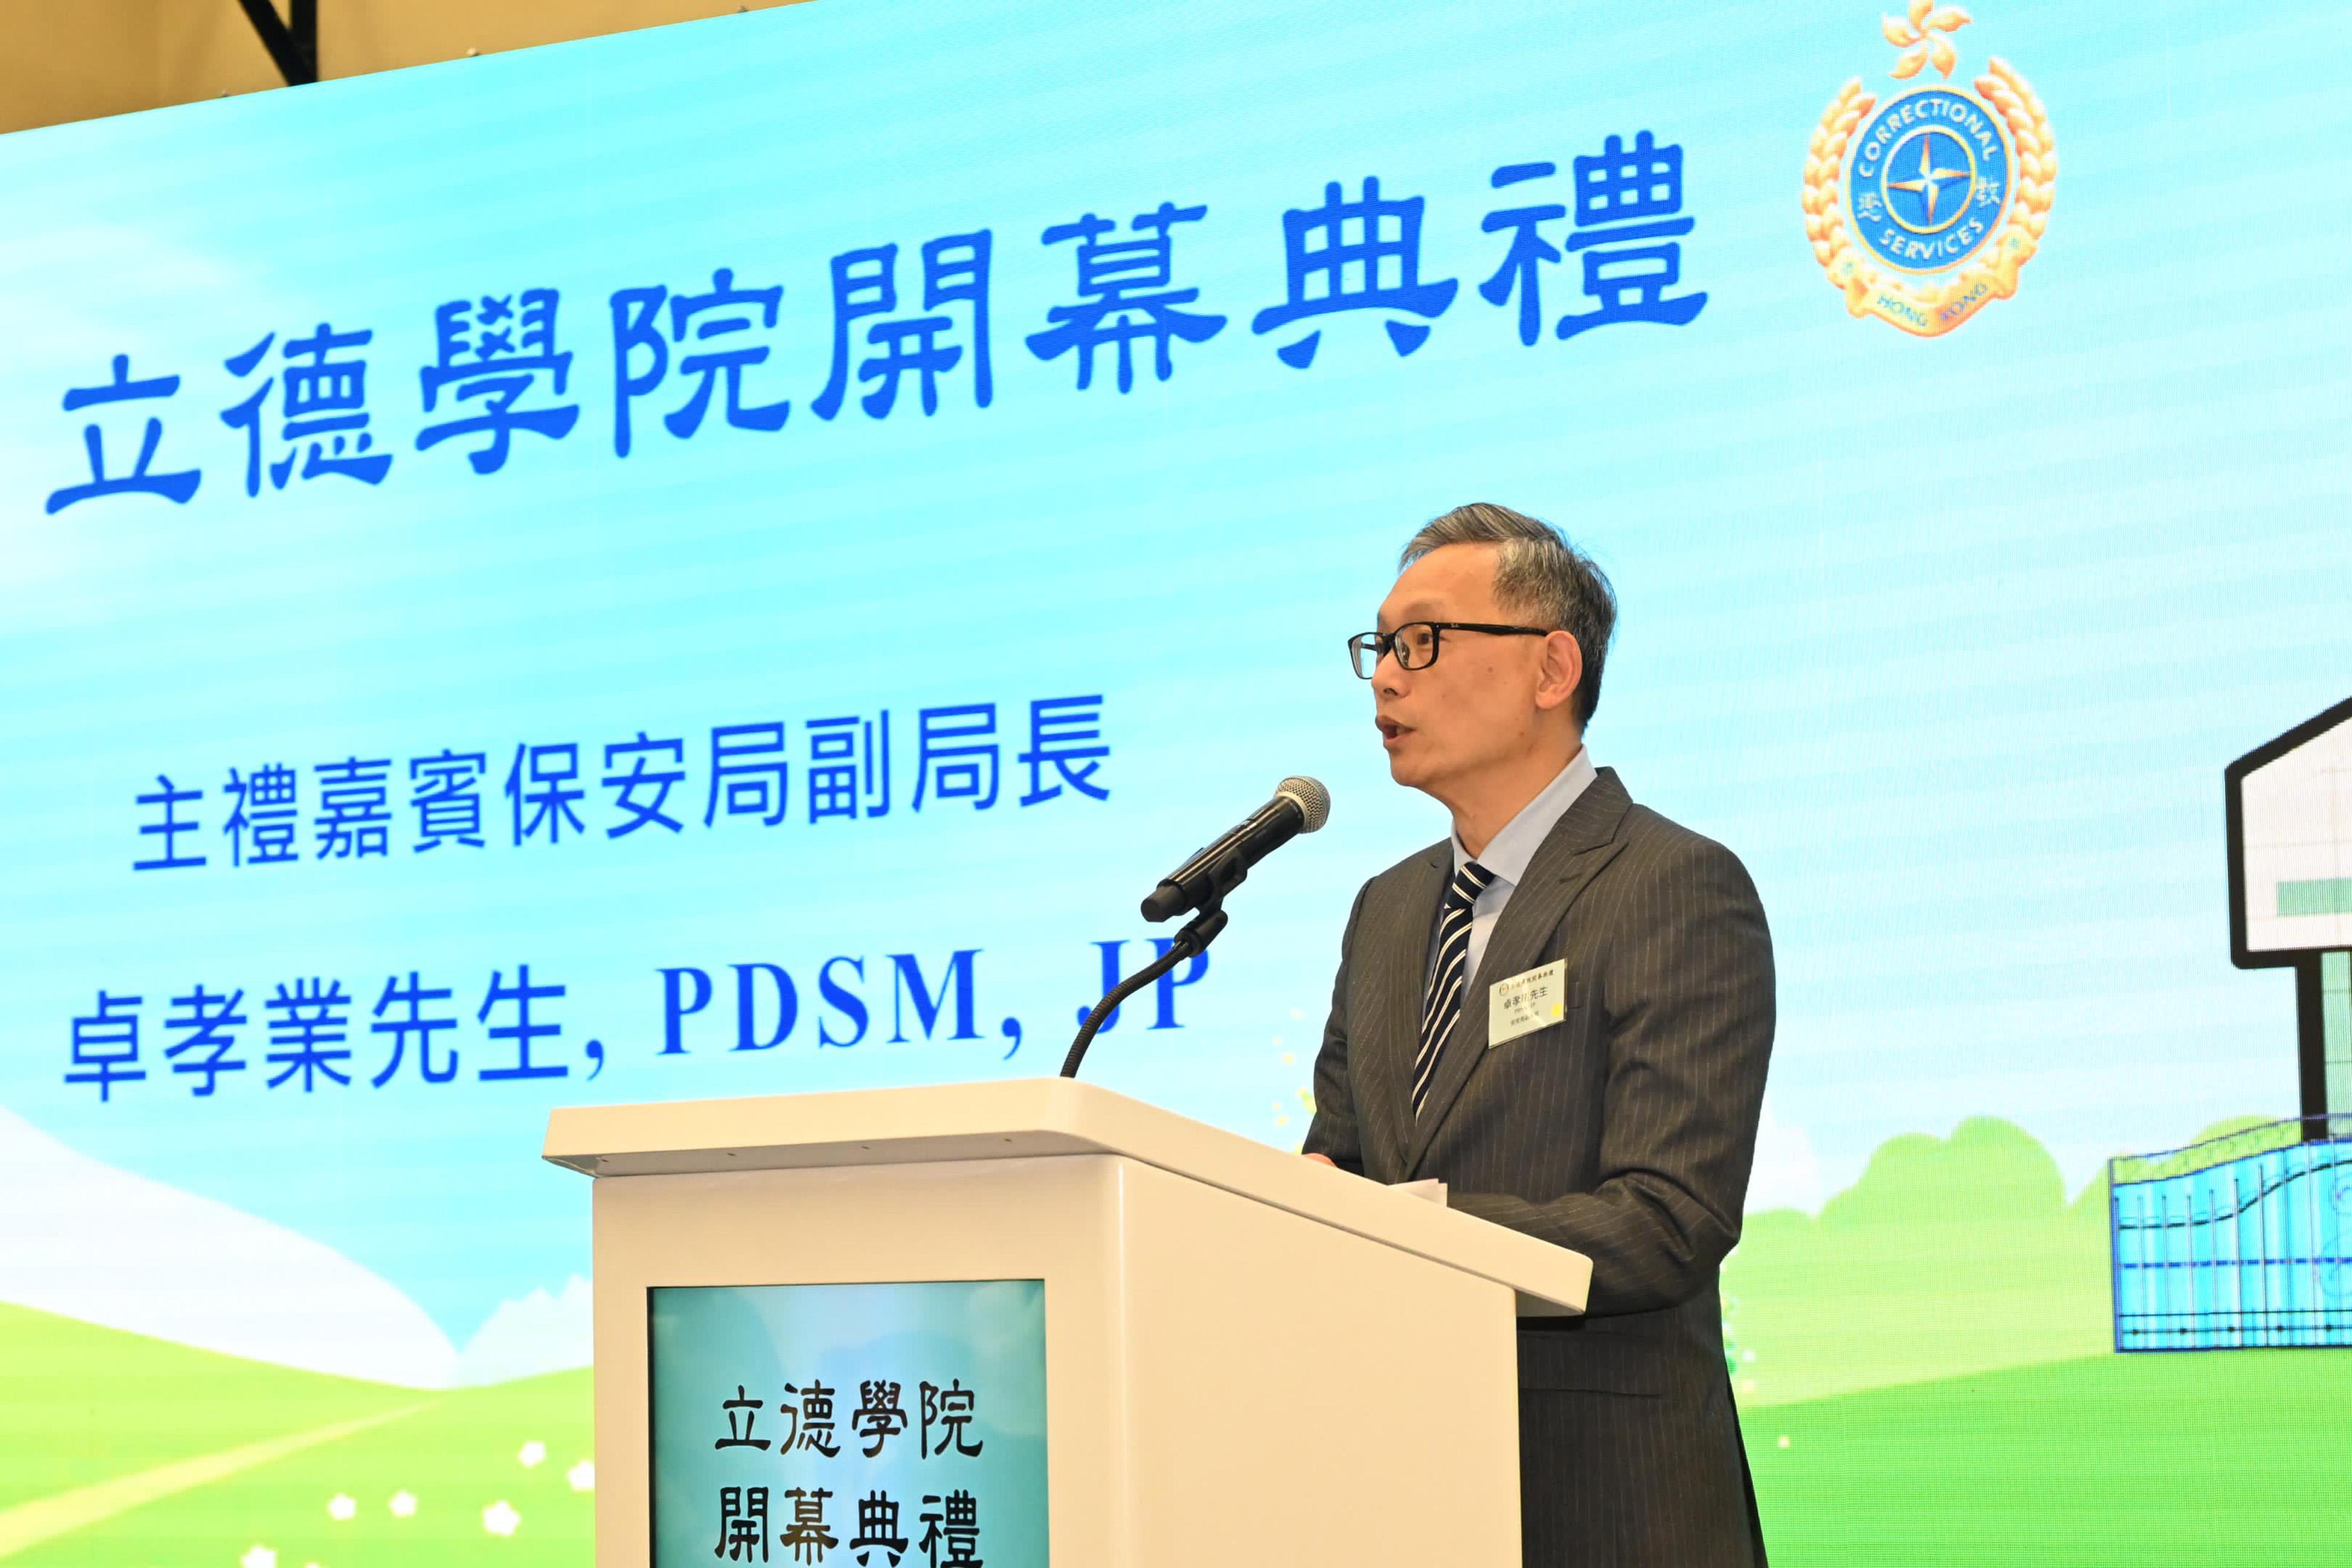 The Correctional Services Department held the opening ceremony of the Ethics College at Pak Sha Wan Correctional Institution today (November 30). Photo shows the Under Secretary for Security, Mr Michael Cheuk, delivering a speech at the ceremony.